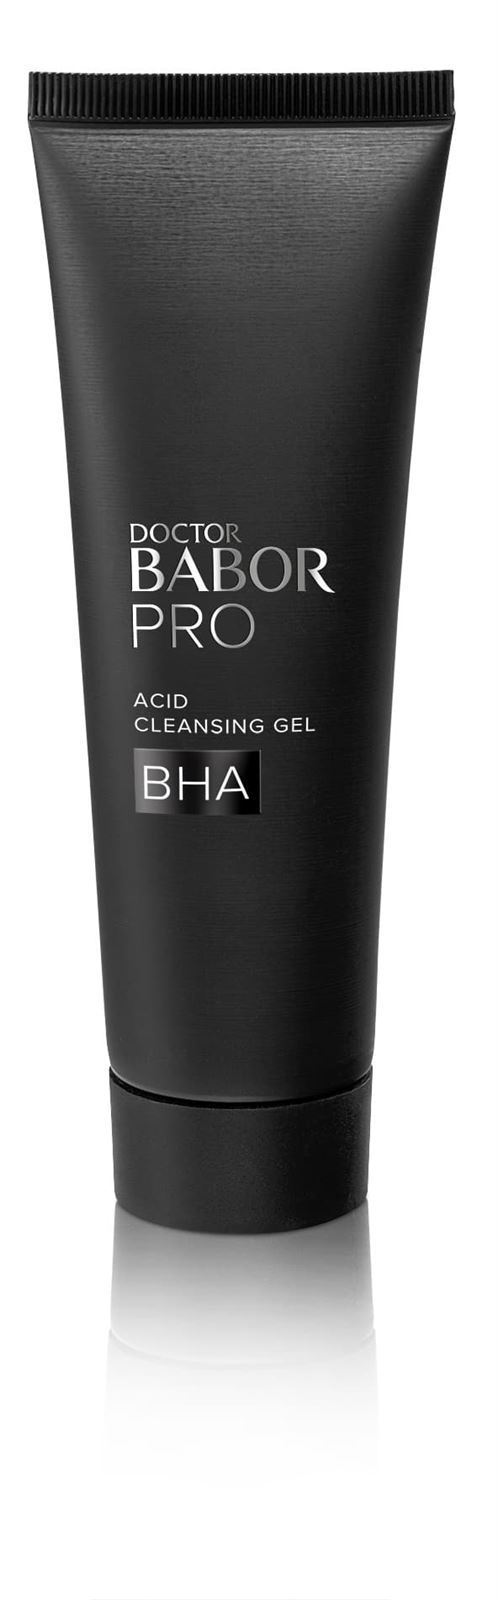 BHA CLEANSING LOTION - Imagen 1